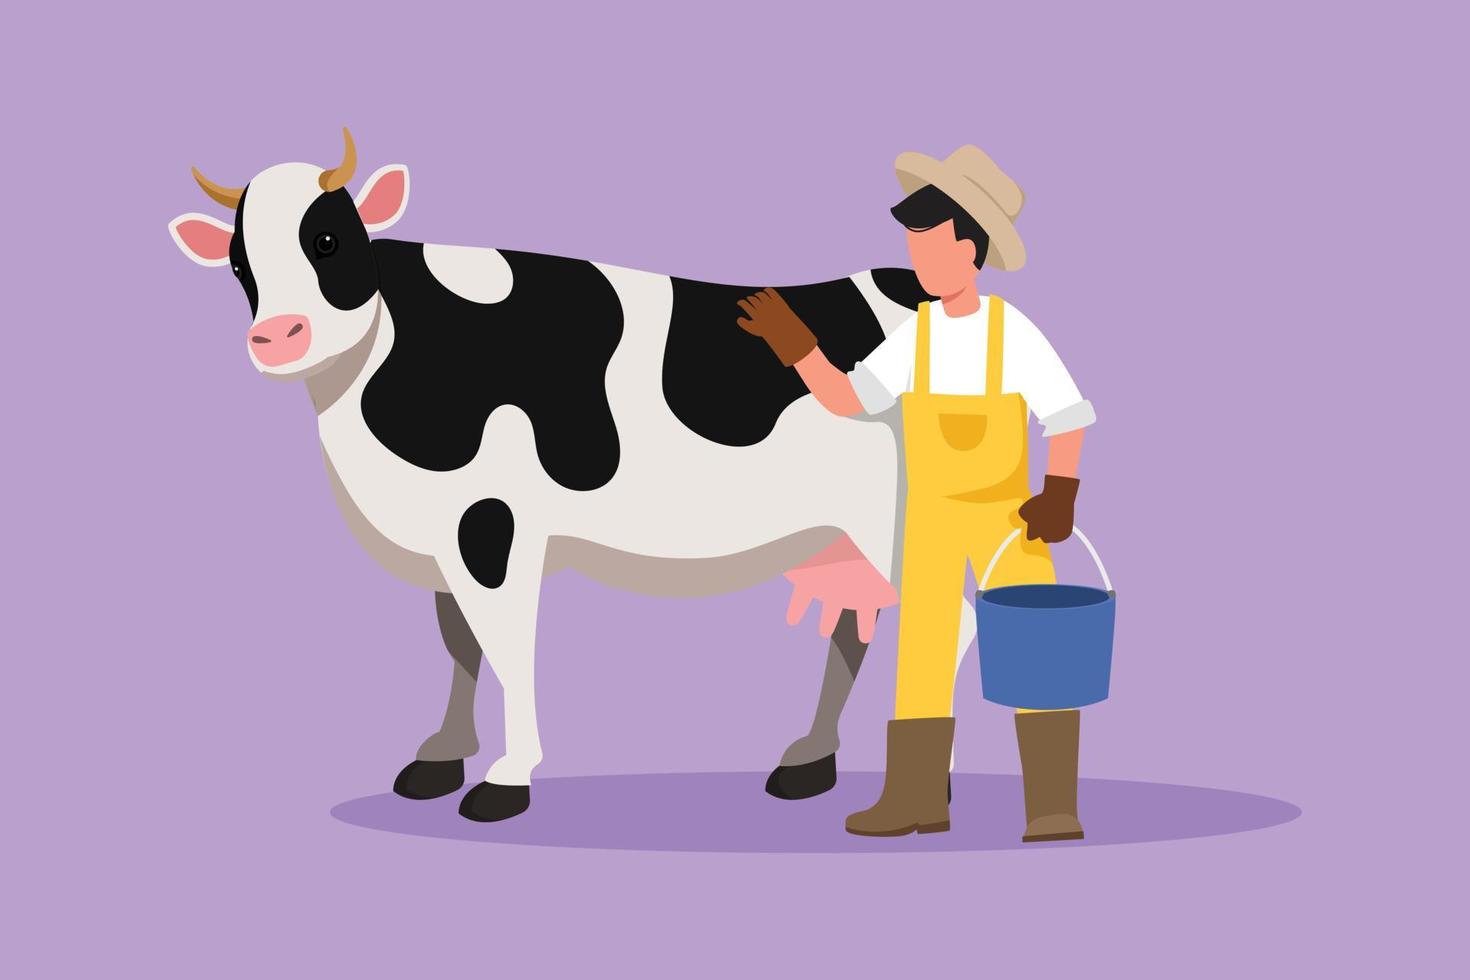 Cartoon flat style drawing male farmer character standing and rubbing the cow while carrying bucket of water. Man feeding farm animal. Successful farming activities. Graphic design vector illustration